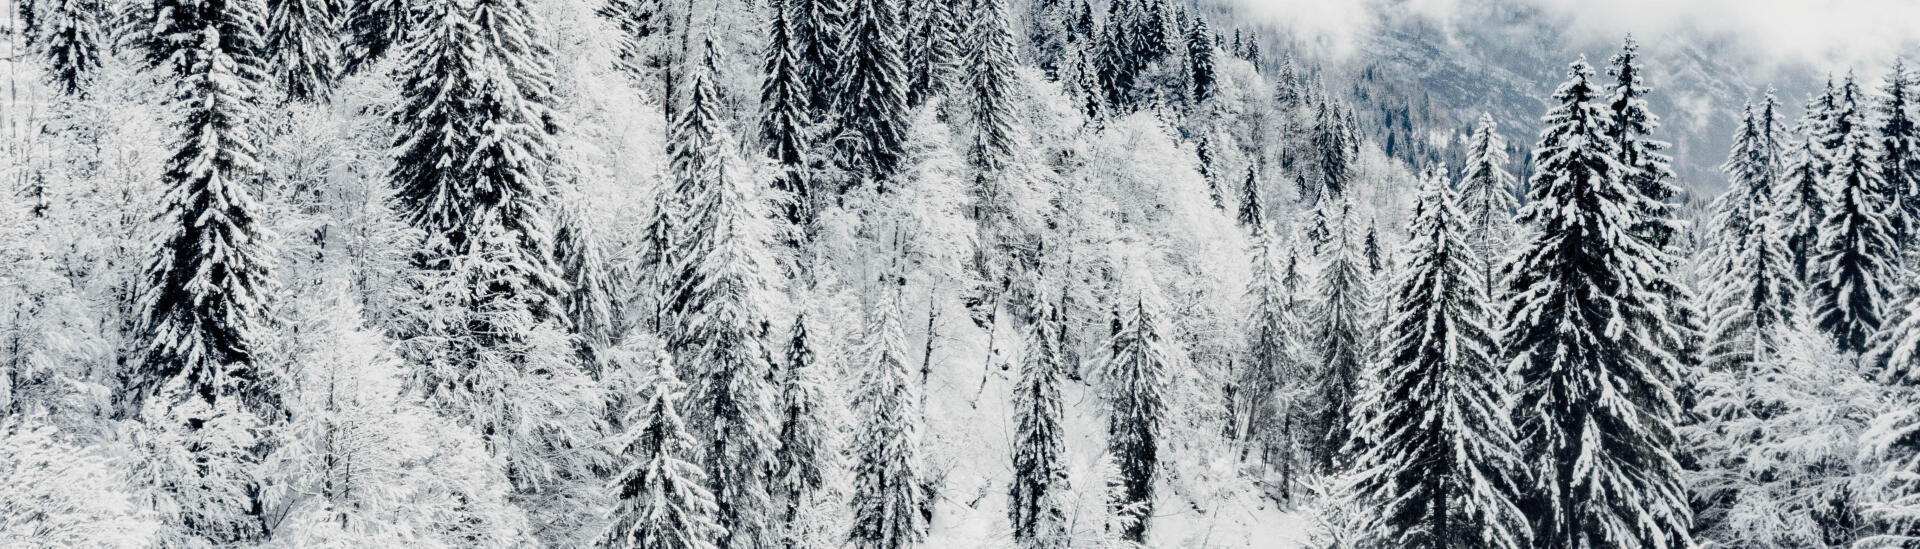 Picture of snow-covered fir trees